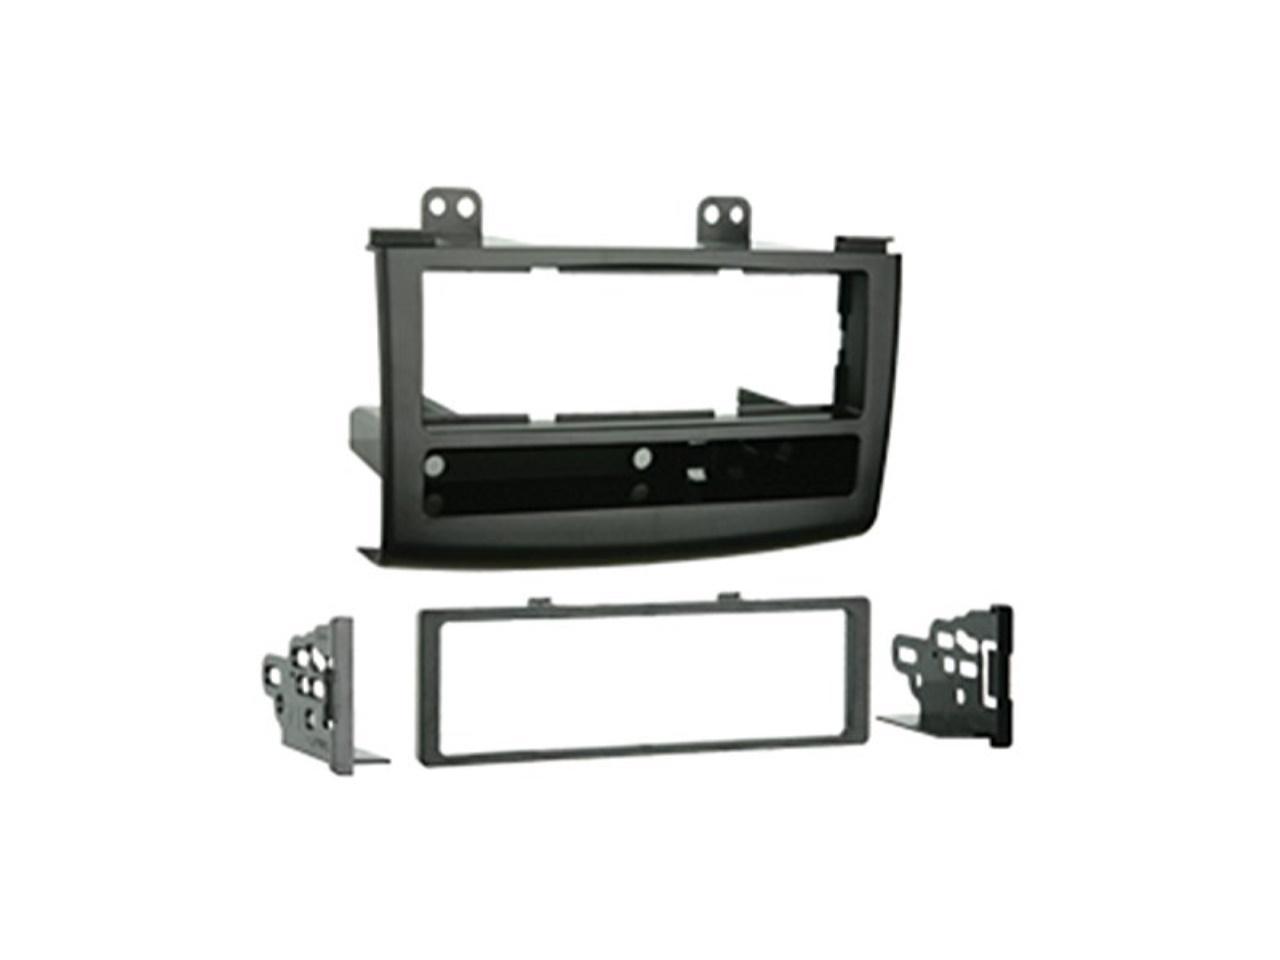 Black Metra 99-7425 Single DIN Installation Kit for 2008-up Nissan Rogue Vehicles